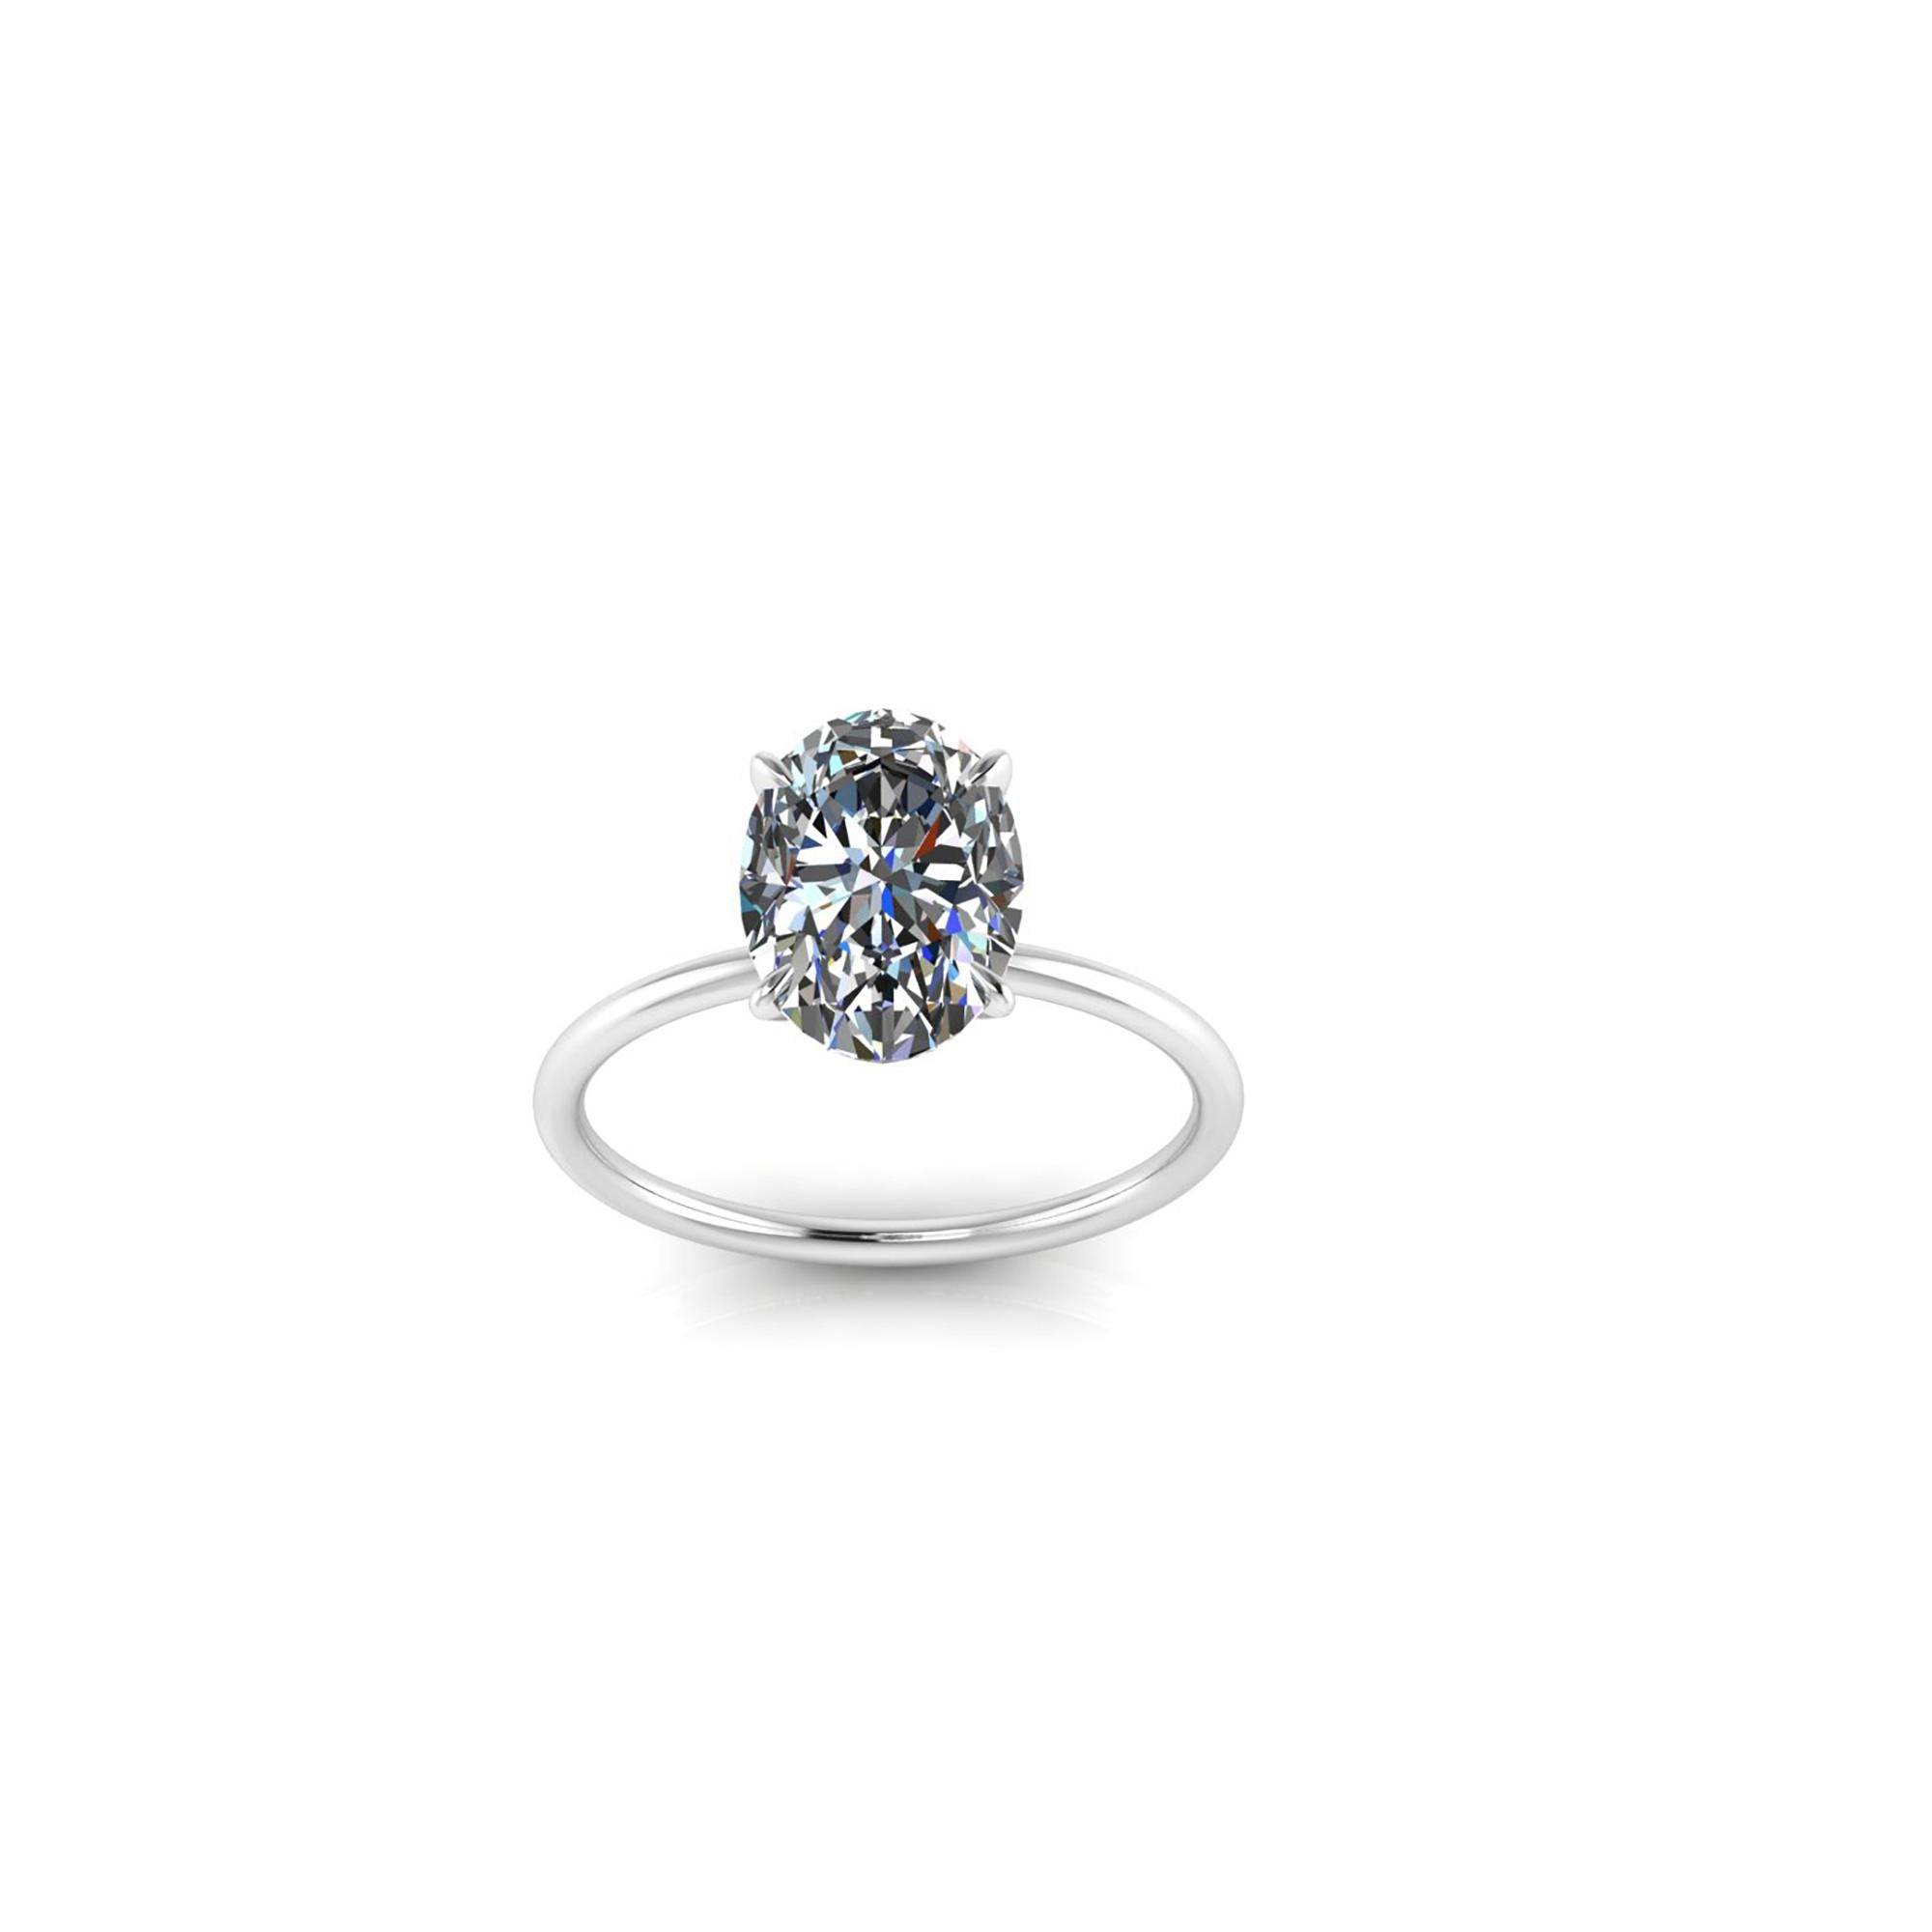 GIA Certified 2.01 carat Oval diamond, F color, VS1 clarity, Triple Excellent specs for a maximum brightness.
Set in a low, thin Platinum 950 setting, minimalist and fine, to enhance the diamond.

The ring is Size 5.75, we offer complimentary sizing